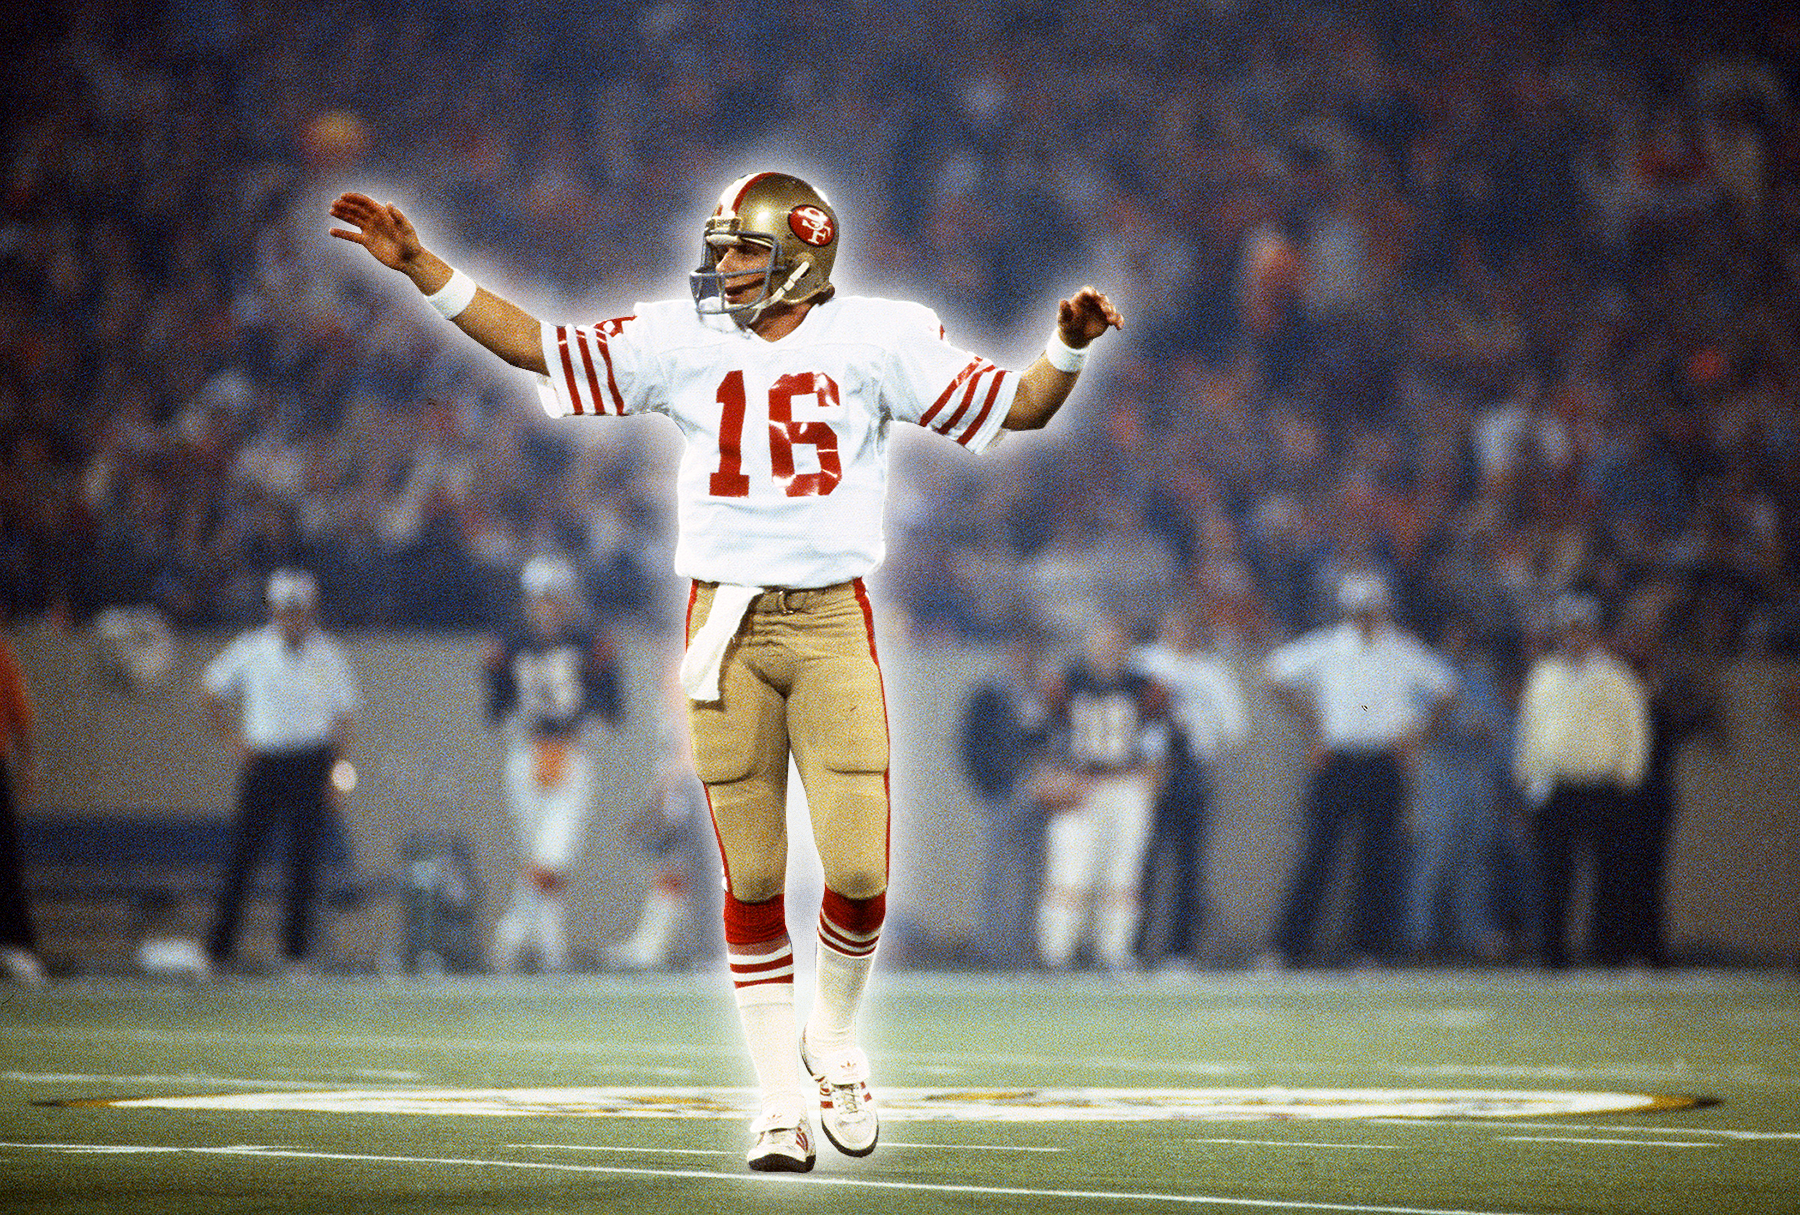 pontiac, mi   january 24  joe montana 16 of the san francisco 49ers celebrates after they scored against the cincinnati bengals during super bowl xvi on january 24, 1982 at the silverdome in pontiac, michigan the niners won the super bowl 26  21 photo by focus on sportgetty images